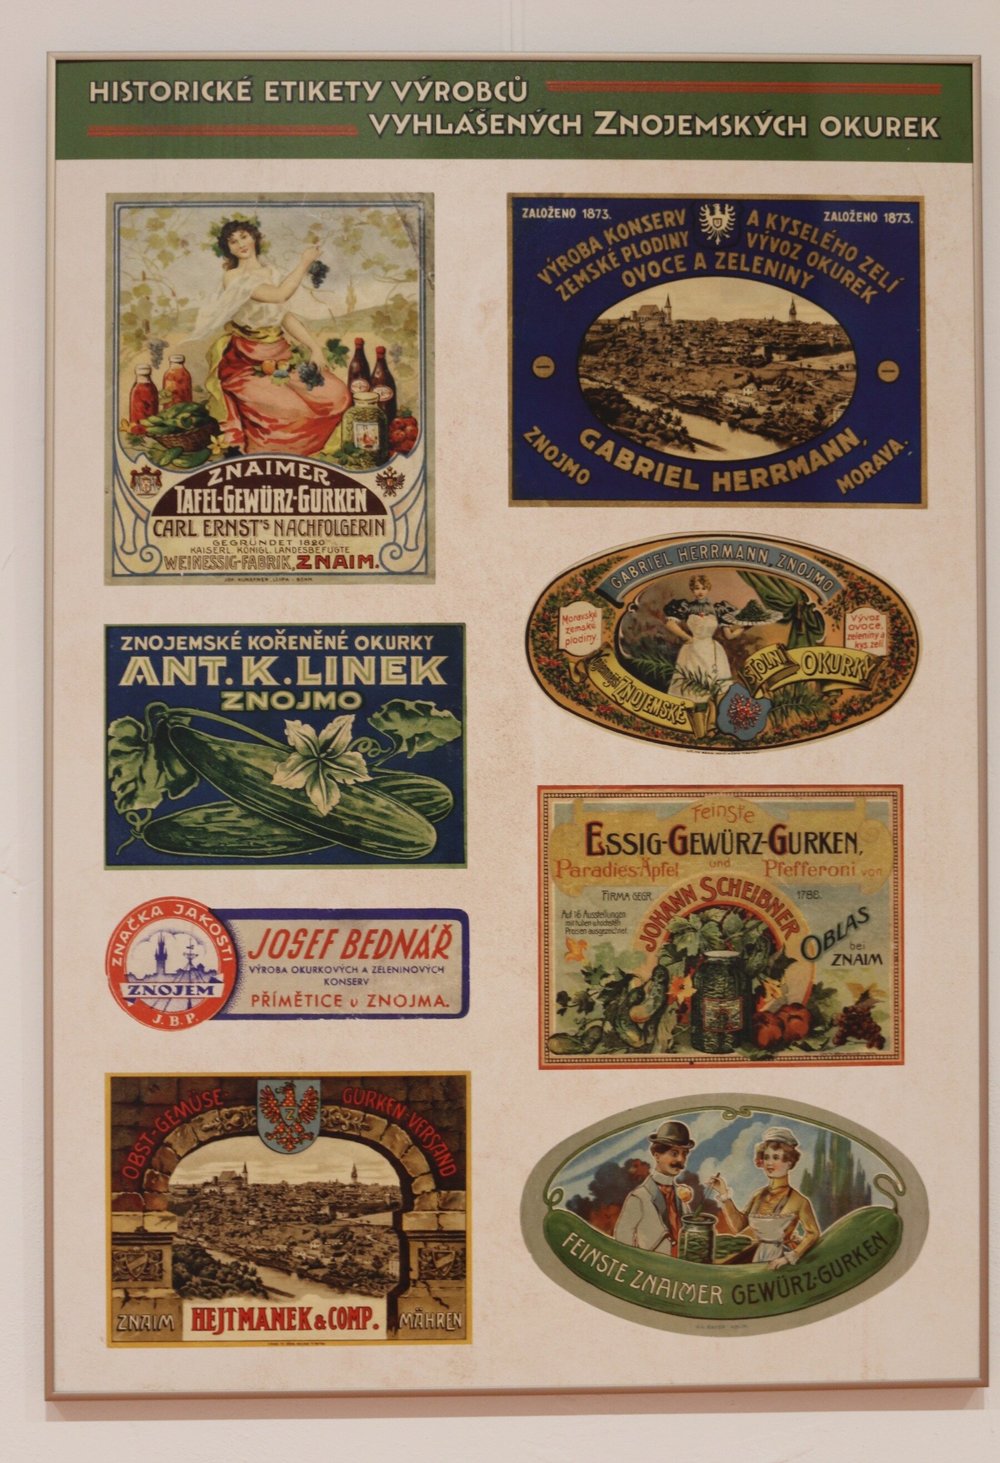 Early 20th century advertising campaigns